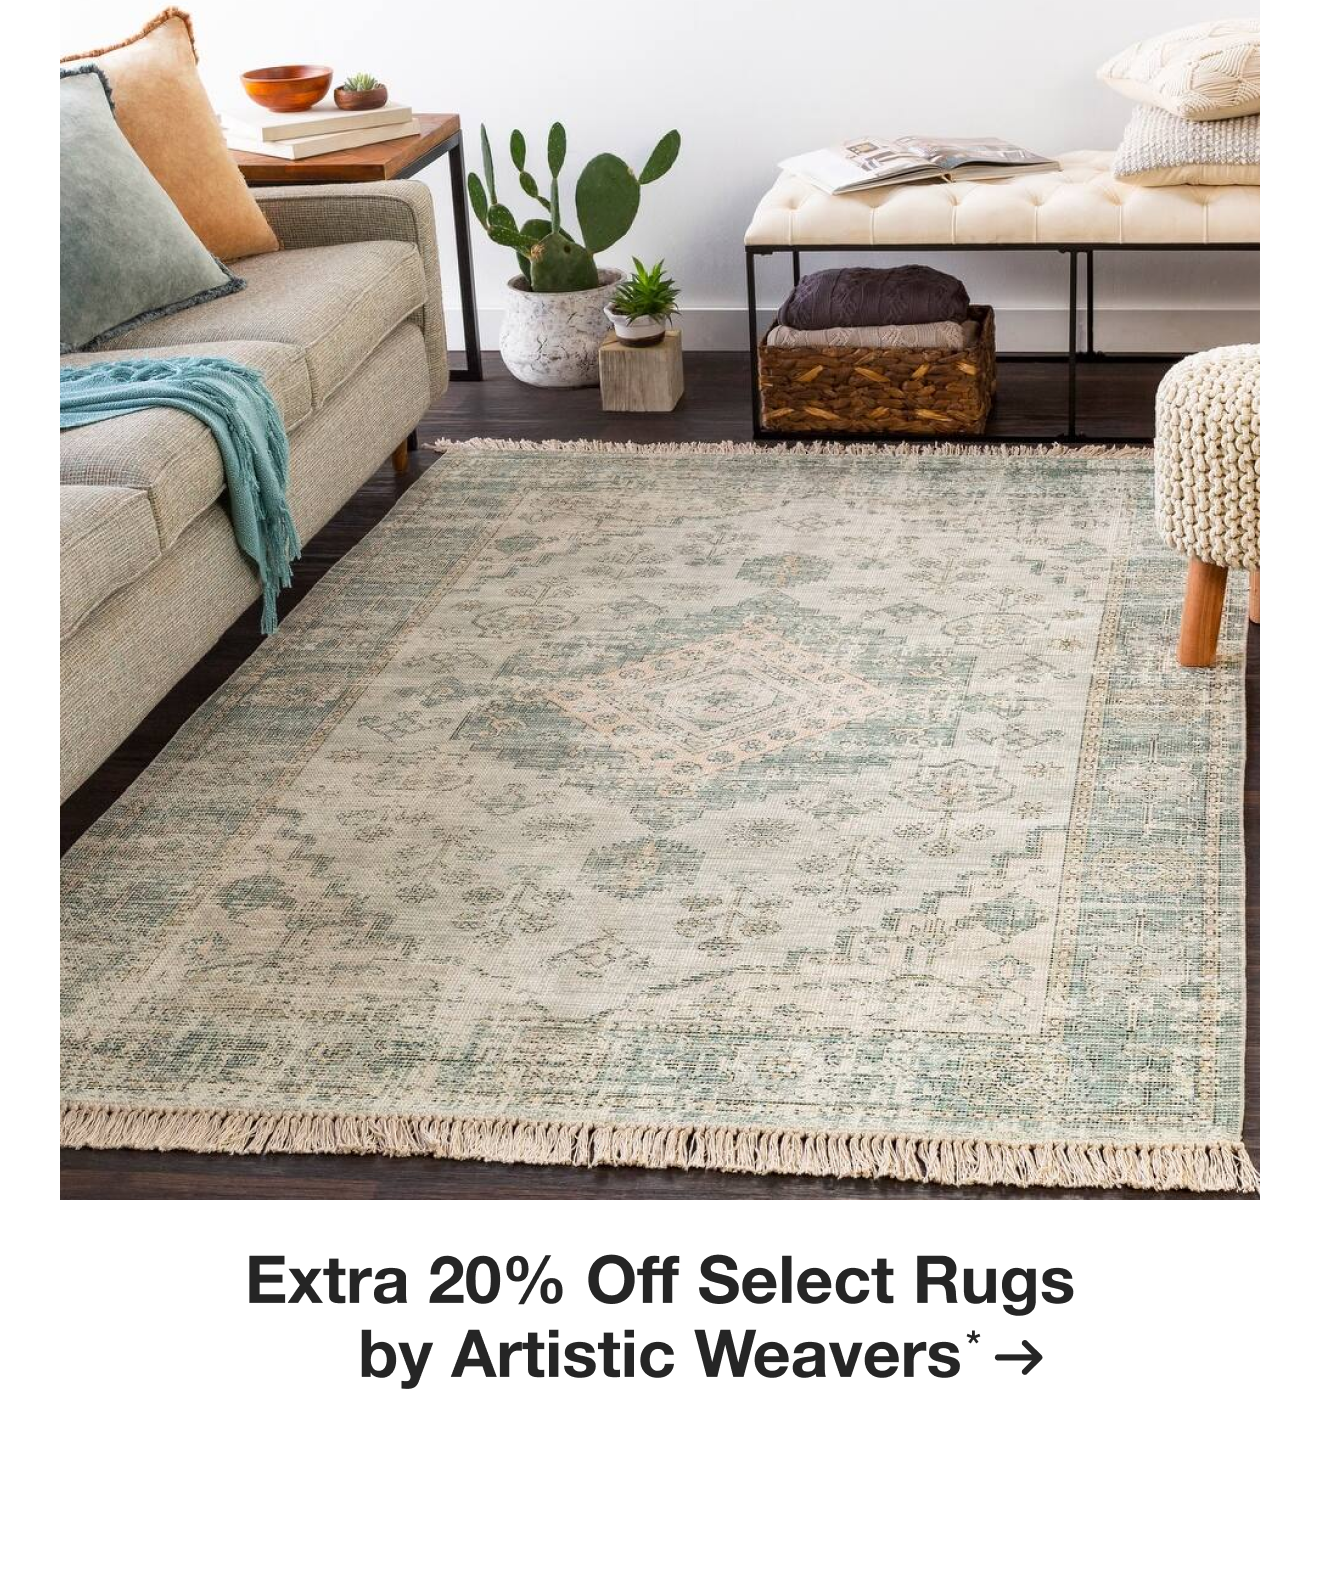 Extra 20% off Select Rugs by Artistic Weavers*